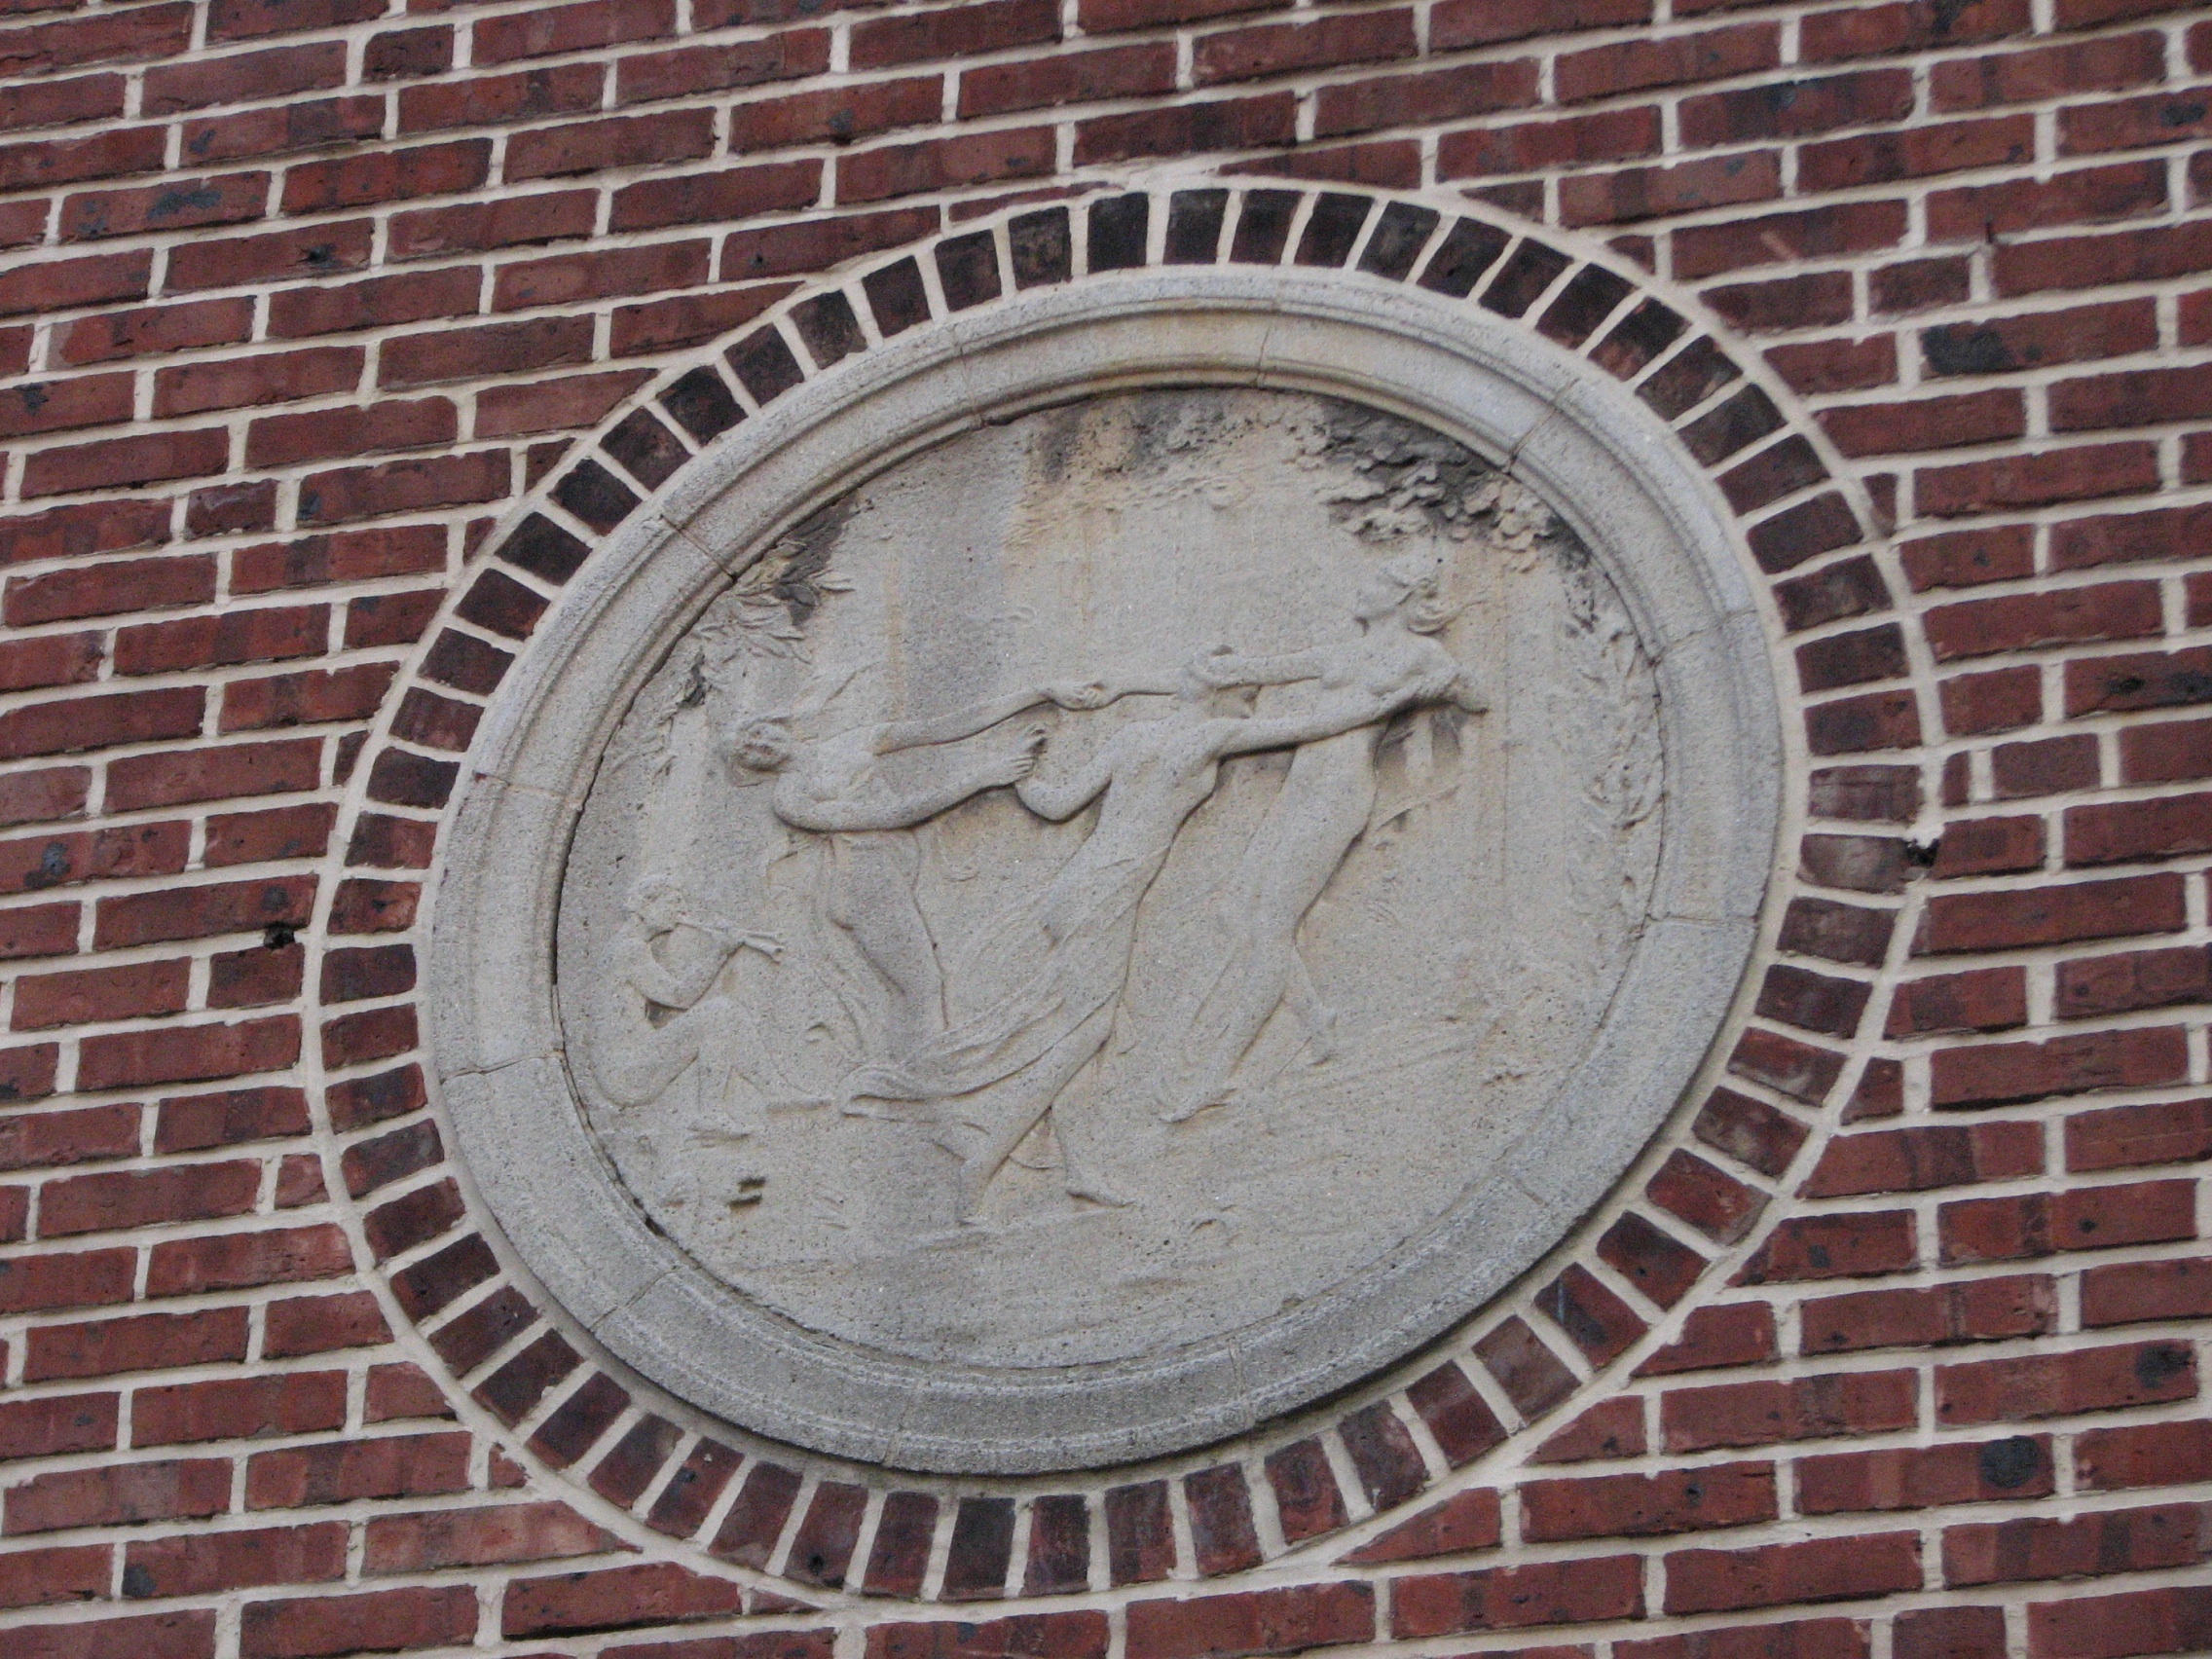 The original design included theatrical bas reliefs on the front of the building.